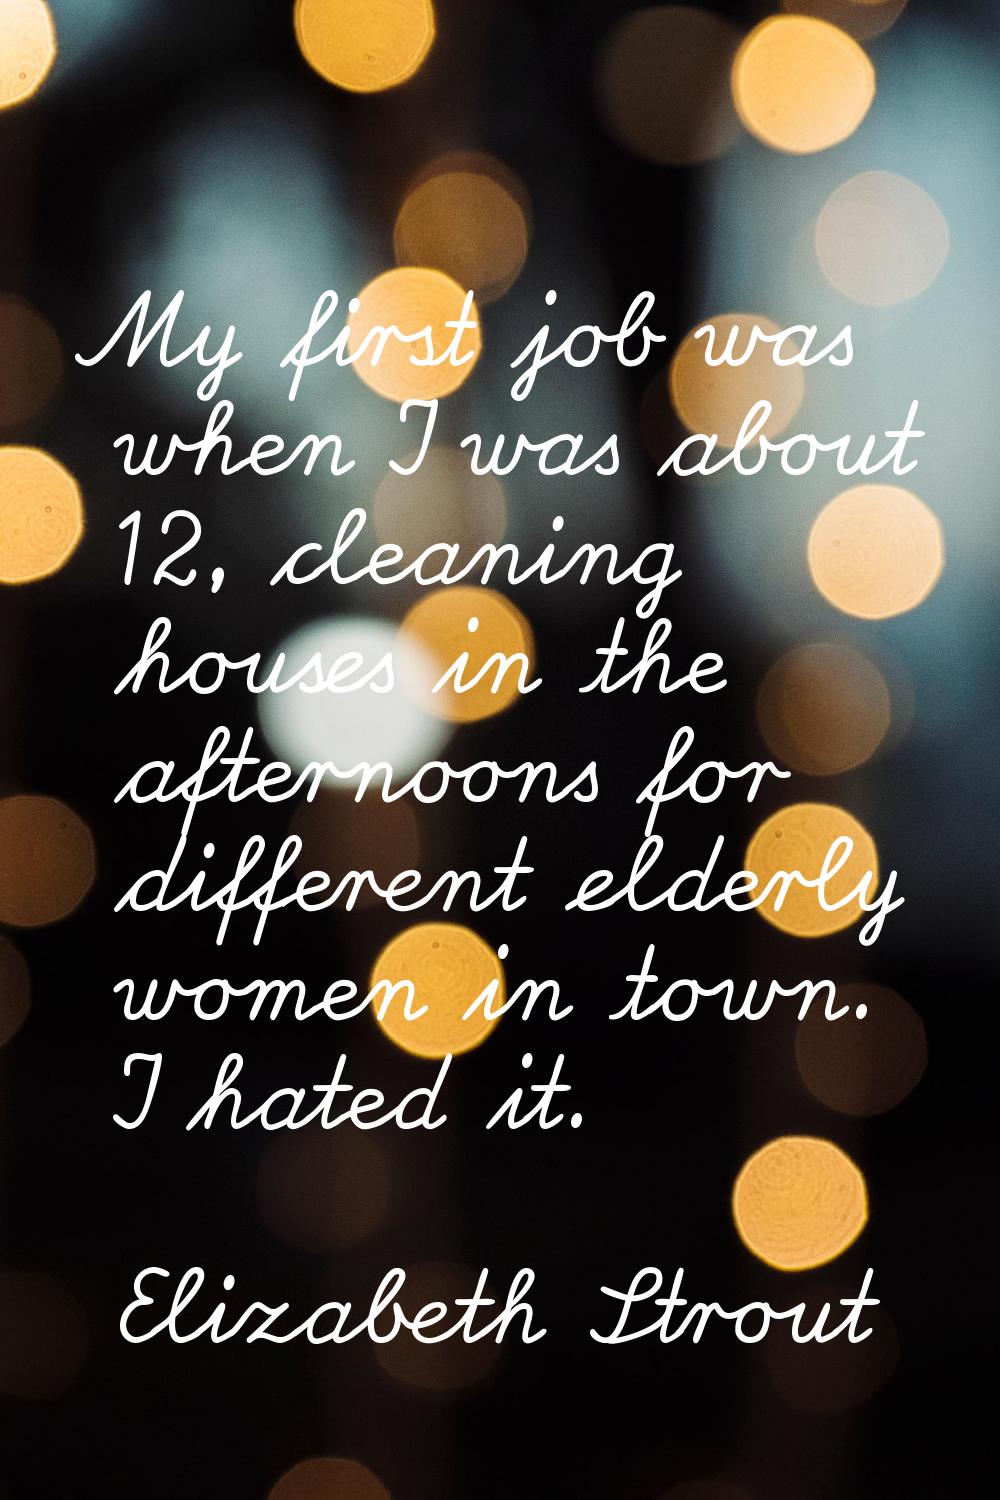 My first job was when I was about 12, cleaning houses in the afternoons for different elderly women